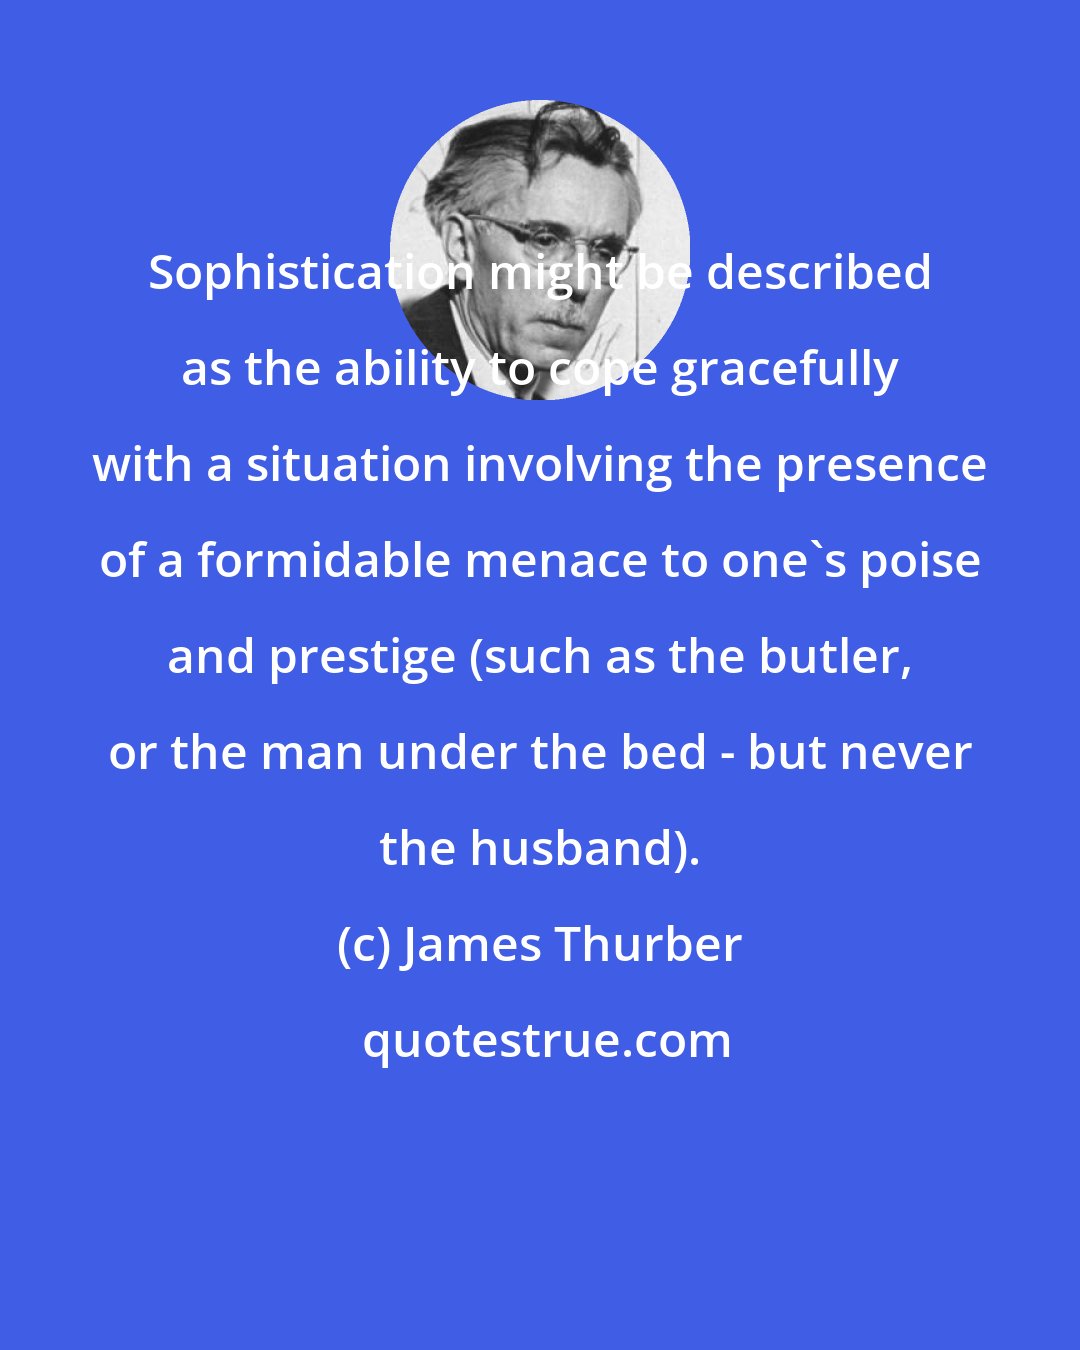 James Thurber: Sophistication might be described as the ability to cope gracefully with a situation involving the presence of a formidable menace to one's poise and prestige (such as the butler, or the man under the bed - but never the husband).